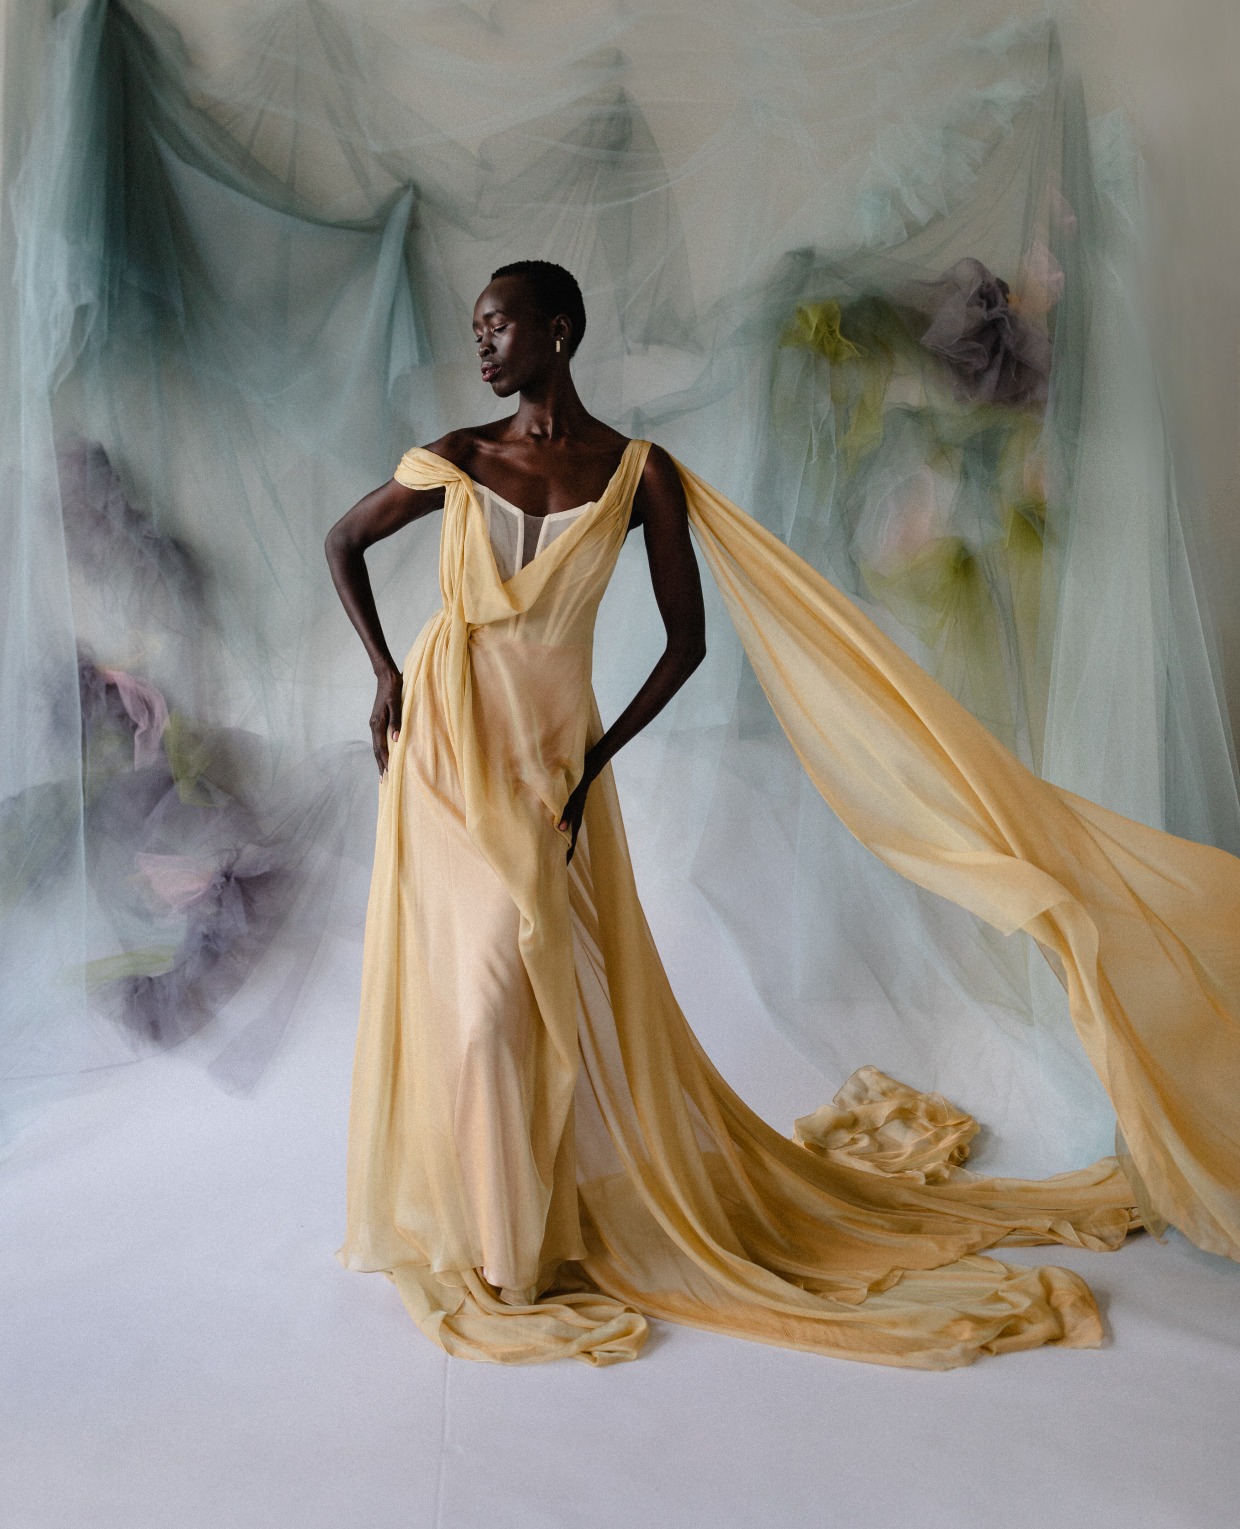 Carol Hannah's new collection was inspired by Impressionism